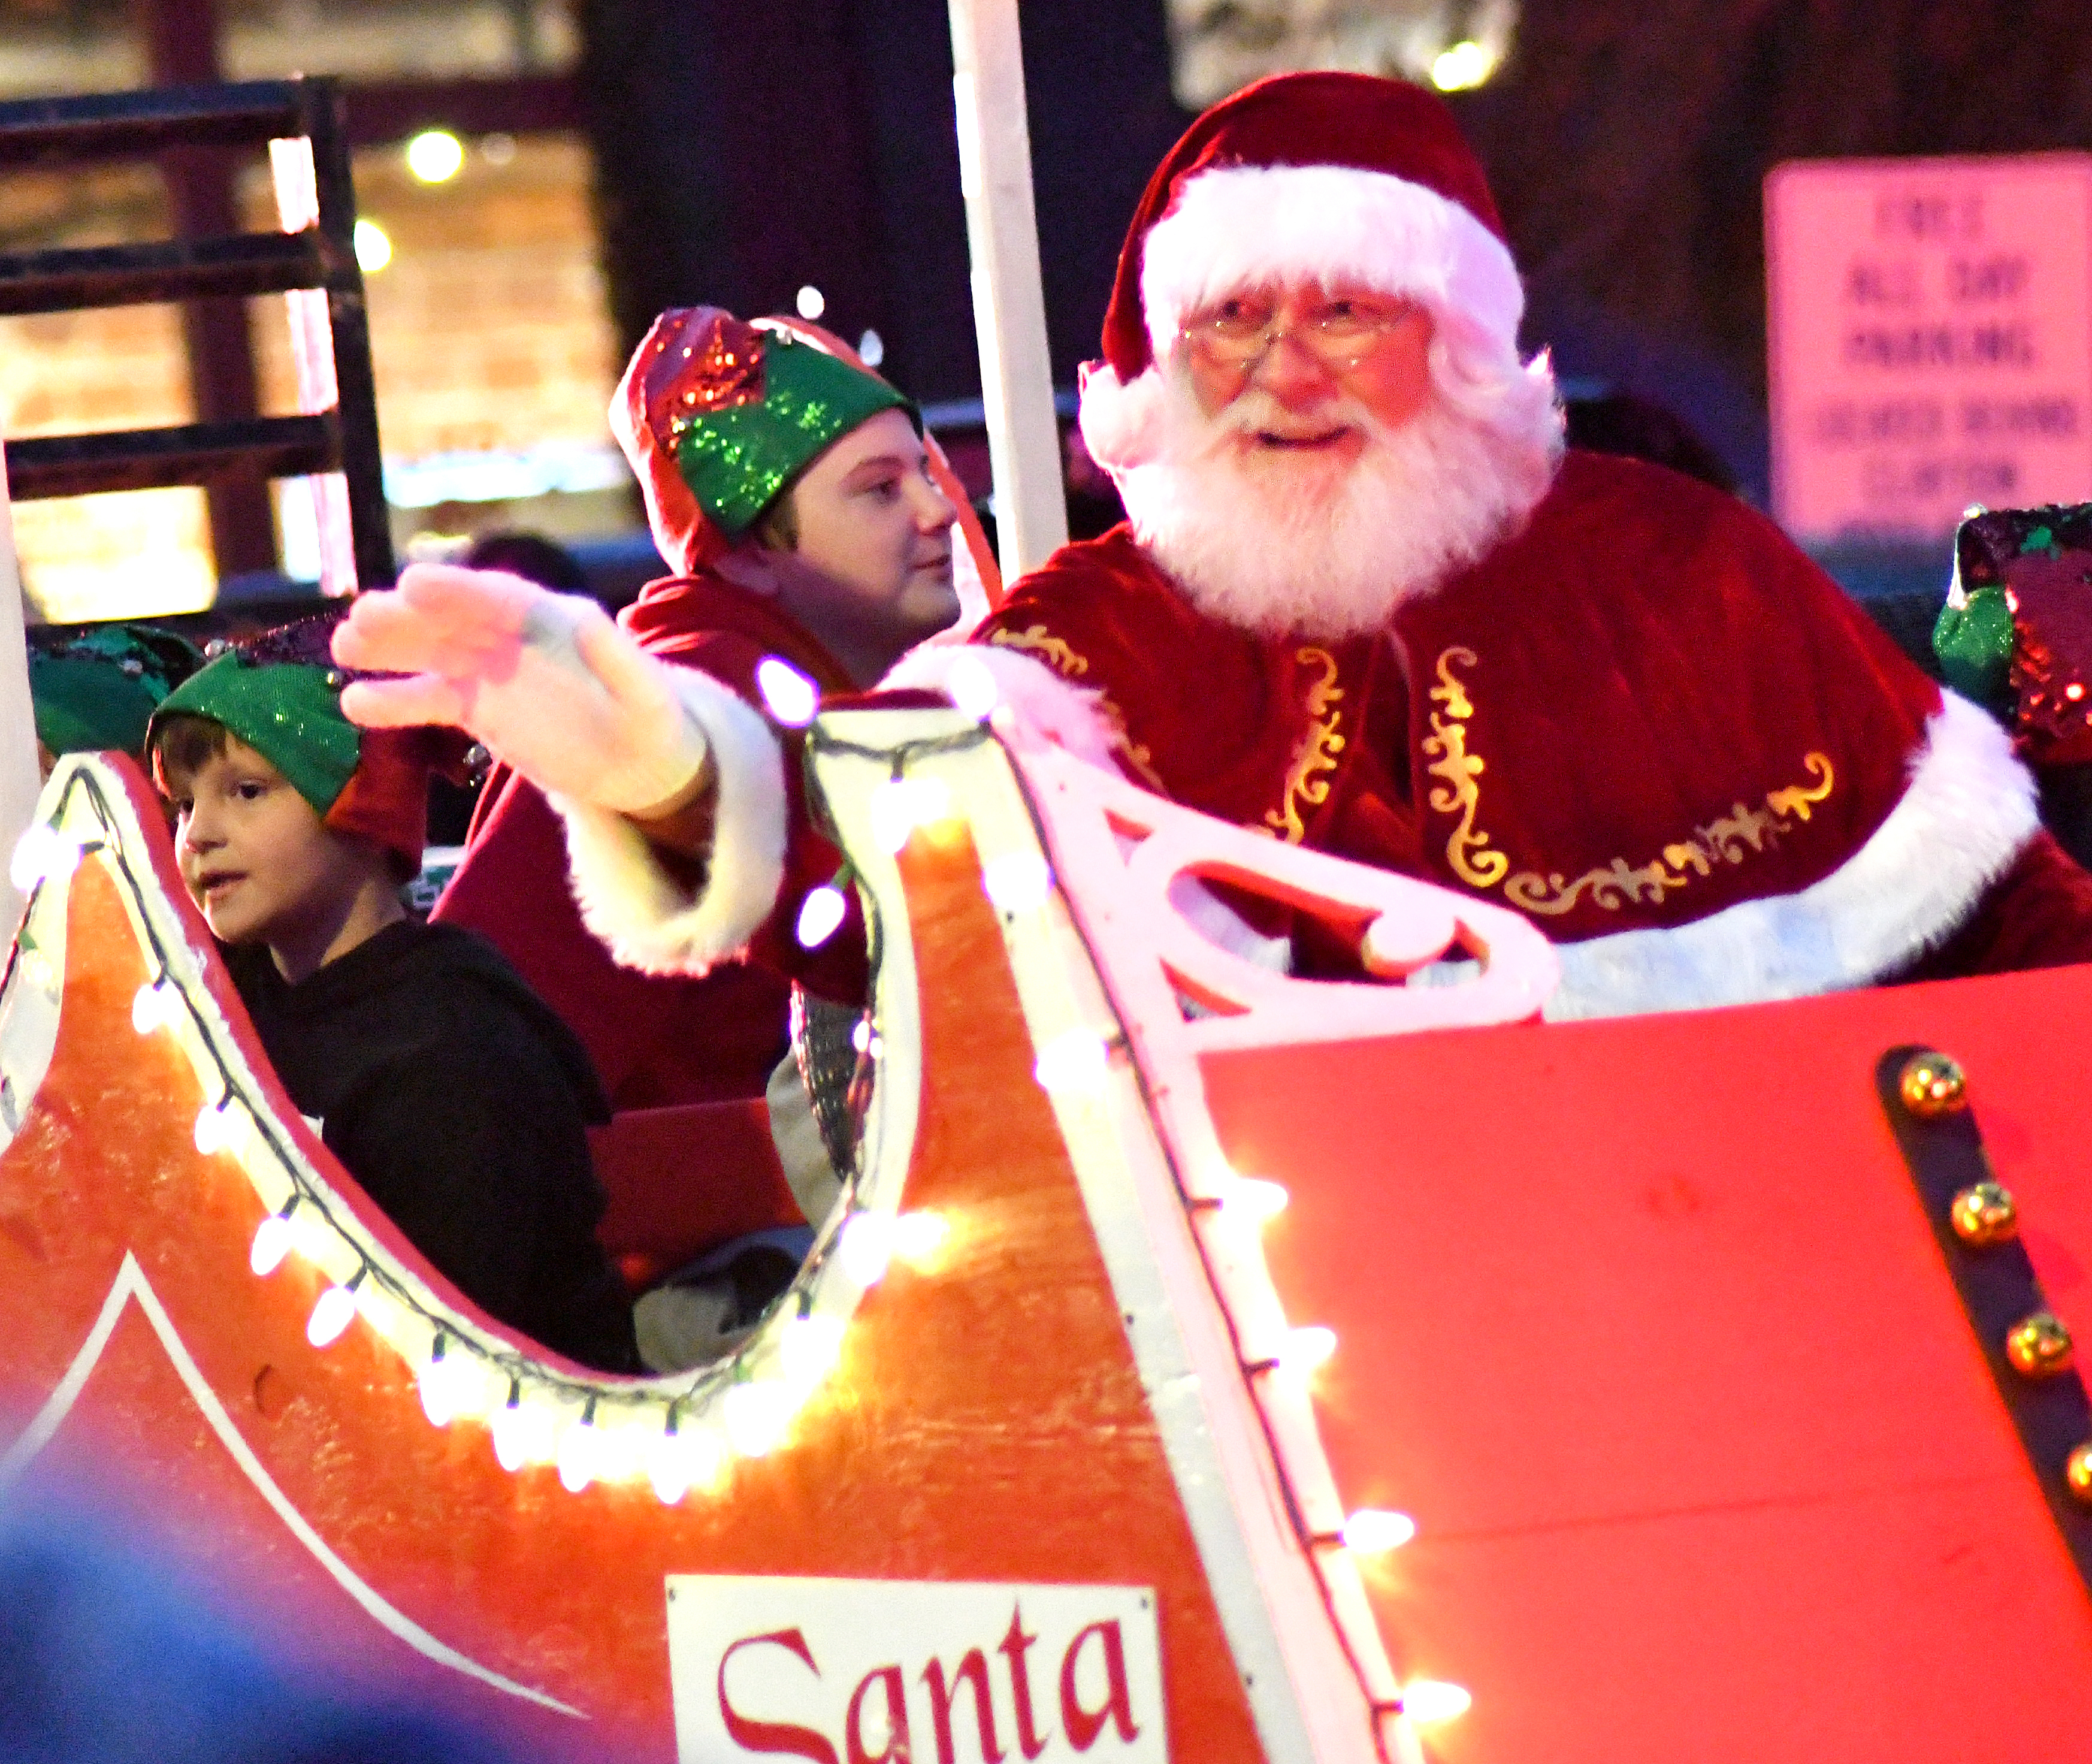 File photo Enoch Autry/The Clayton Tribune. Santa Claus waves to the crowd during the 2021 Clayton Christmas parade on Main Street. This year’s event is Dec. 3, starting at 2 p.m.